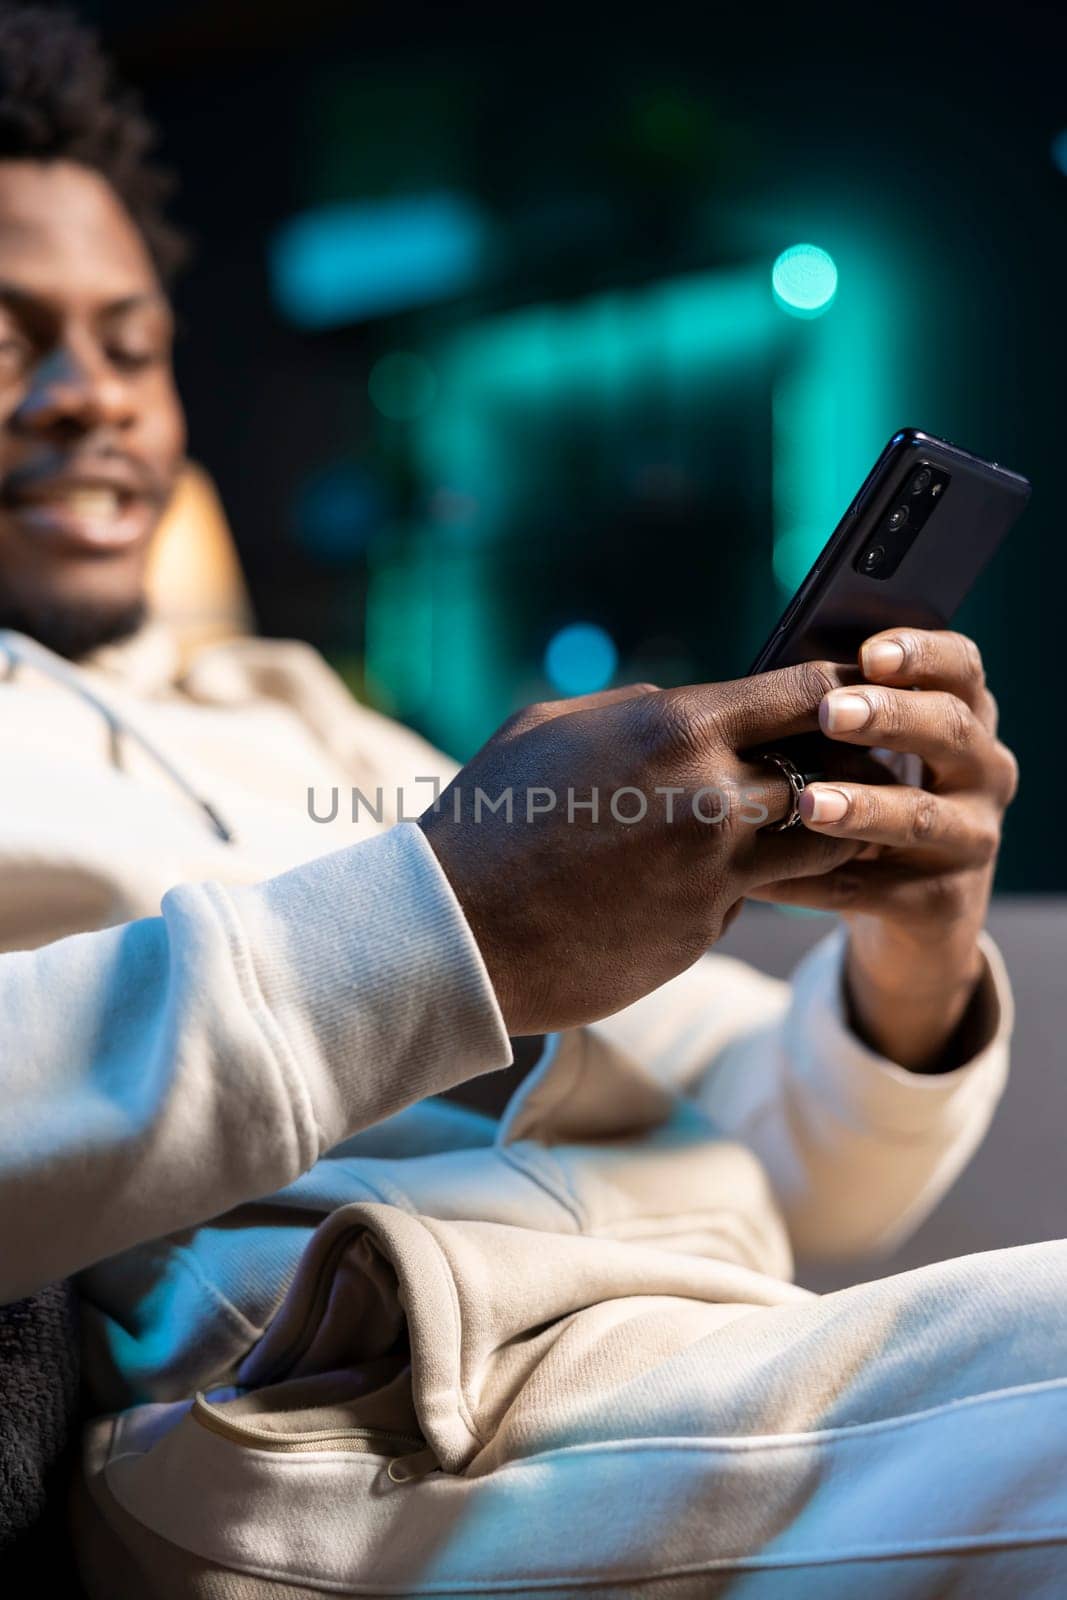 Focus on cellphone used by man in blurry background to compose messages, chatting with internet friends. Close up of mobile phone used by person to scroll on social media feed while in apartment